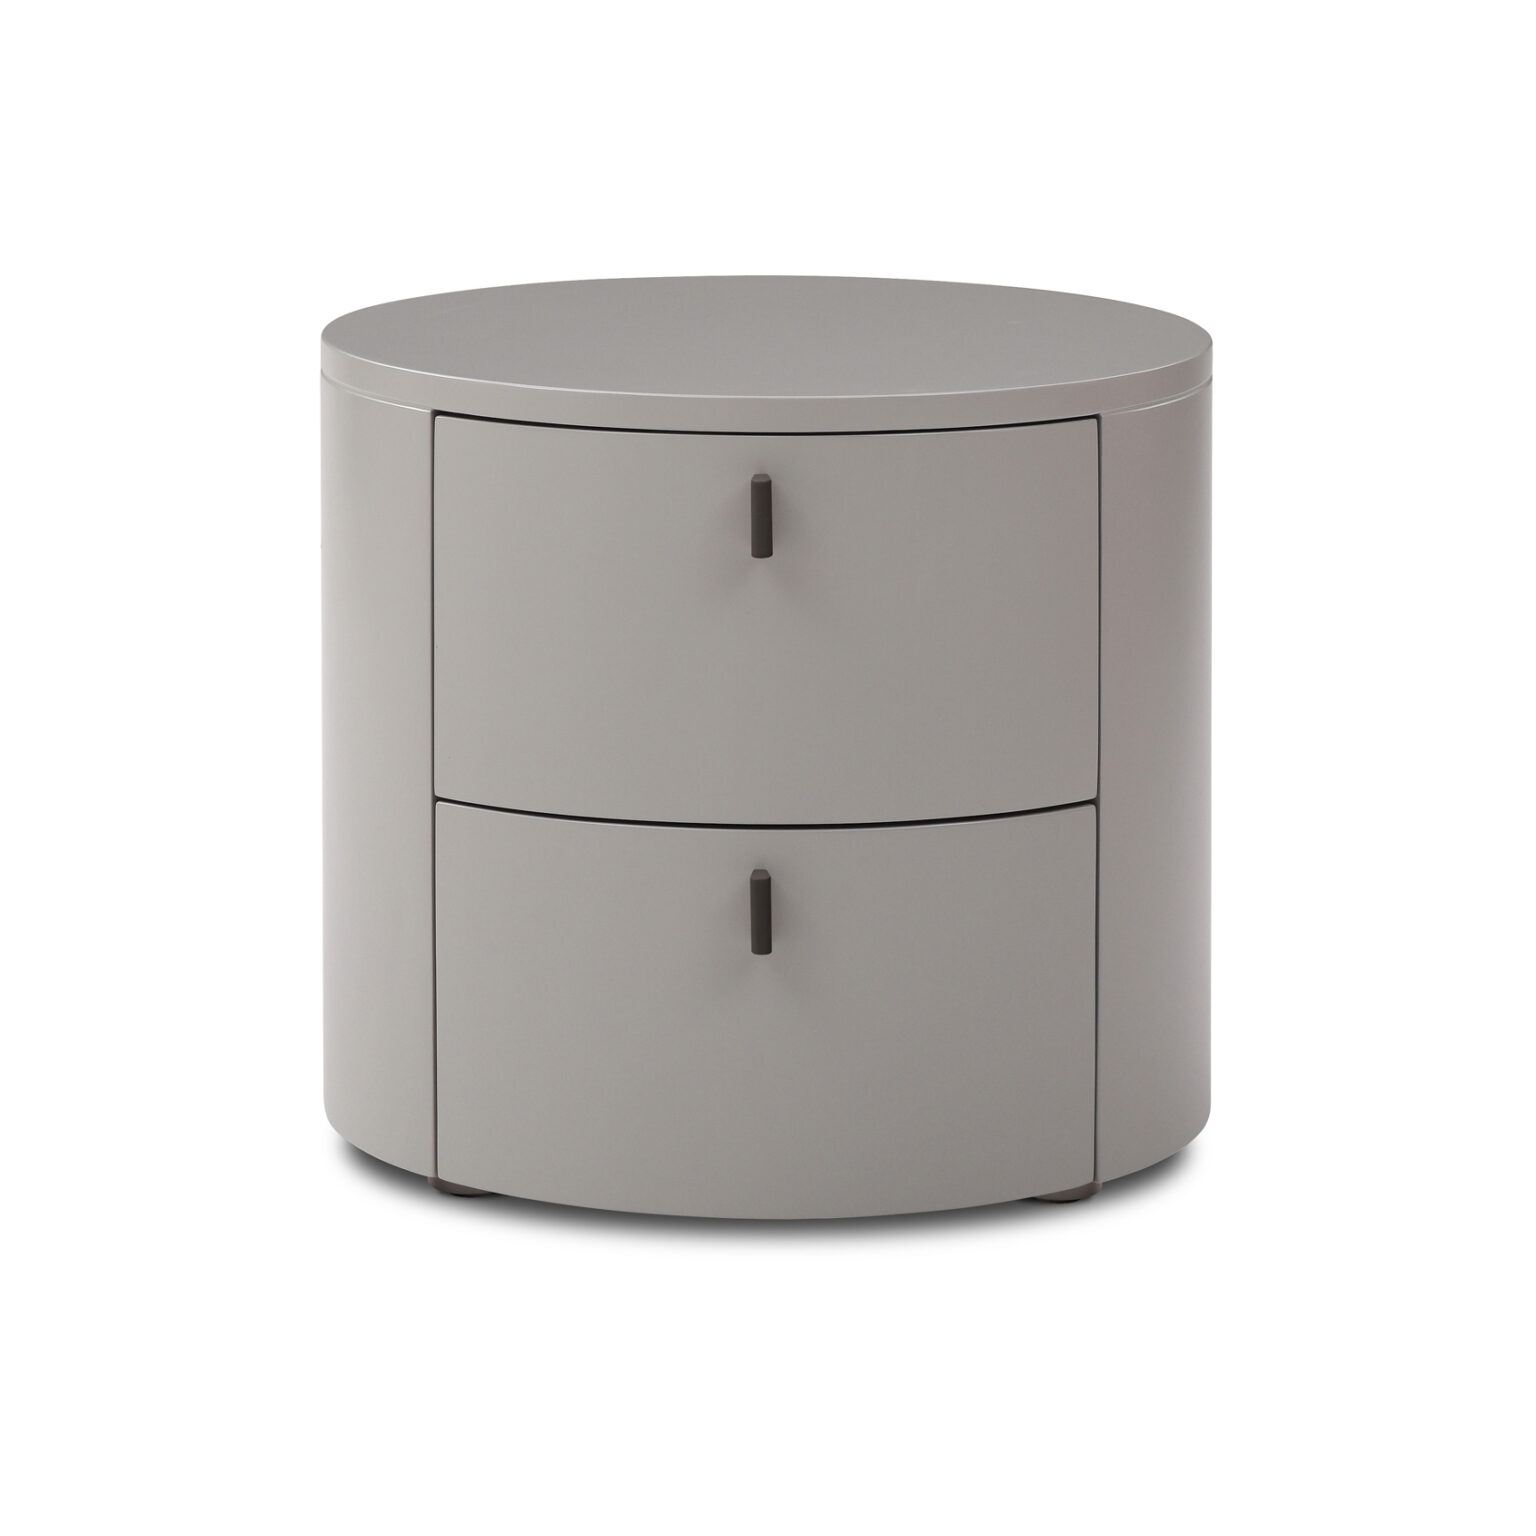 Sims Round Bedside Table - Merlino Furniture